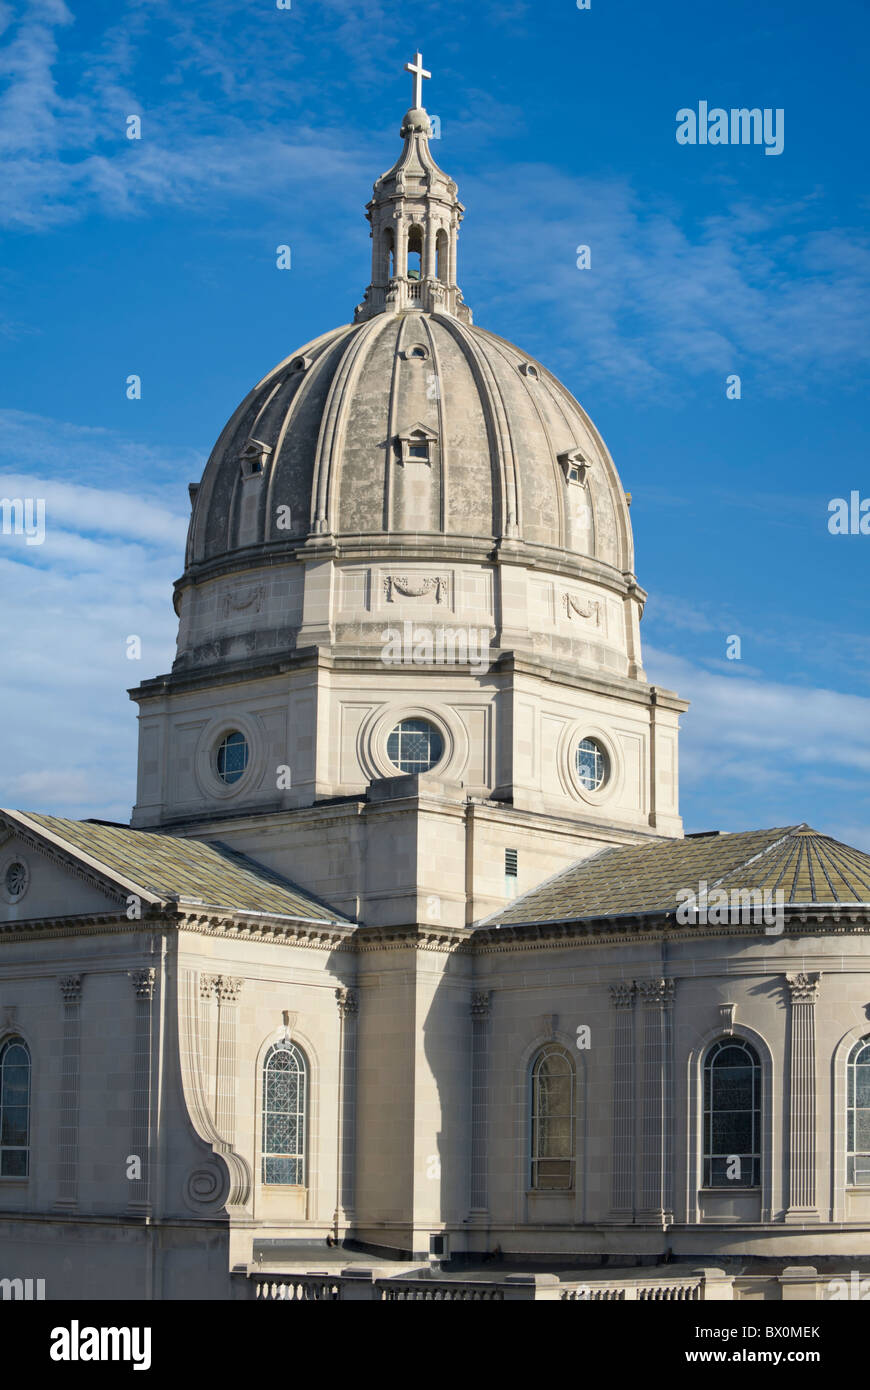 Dome of Catholic cathedral built of stone in Altoona, PA, USA Stock ...